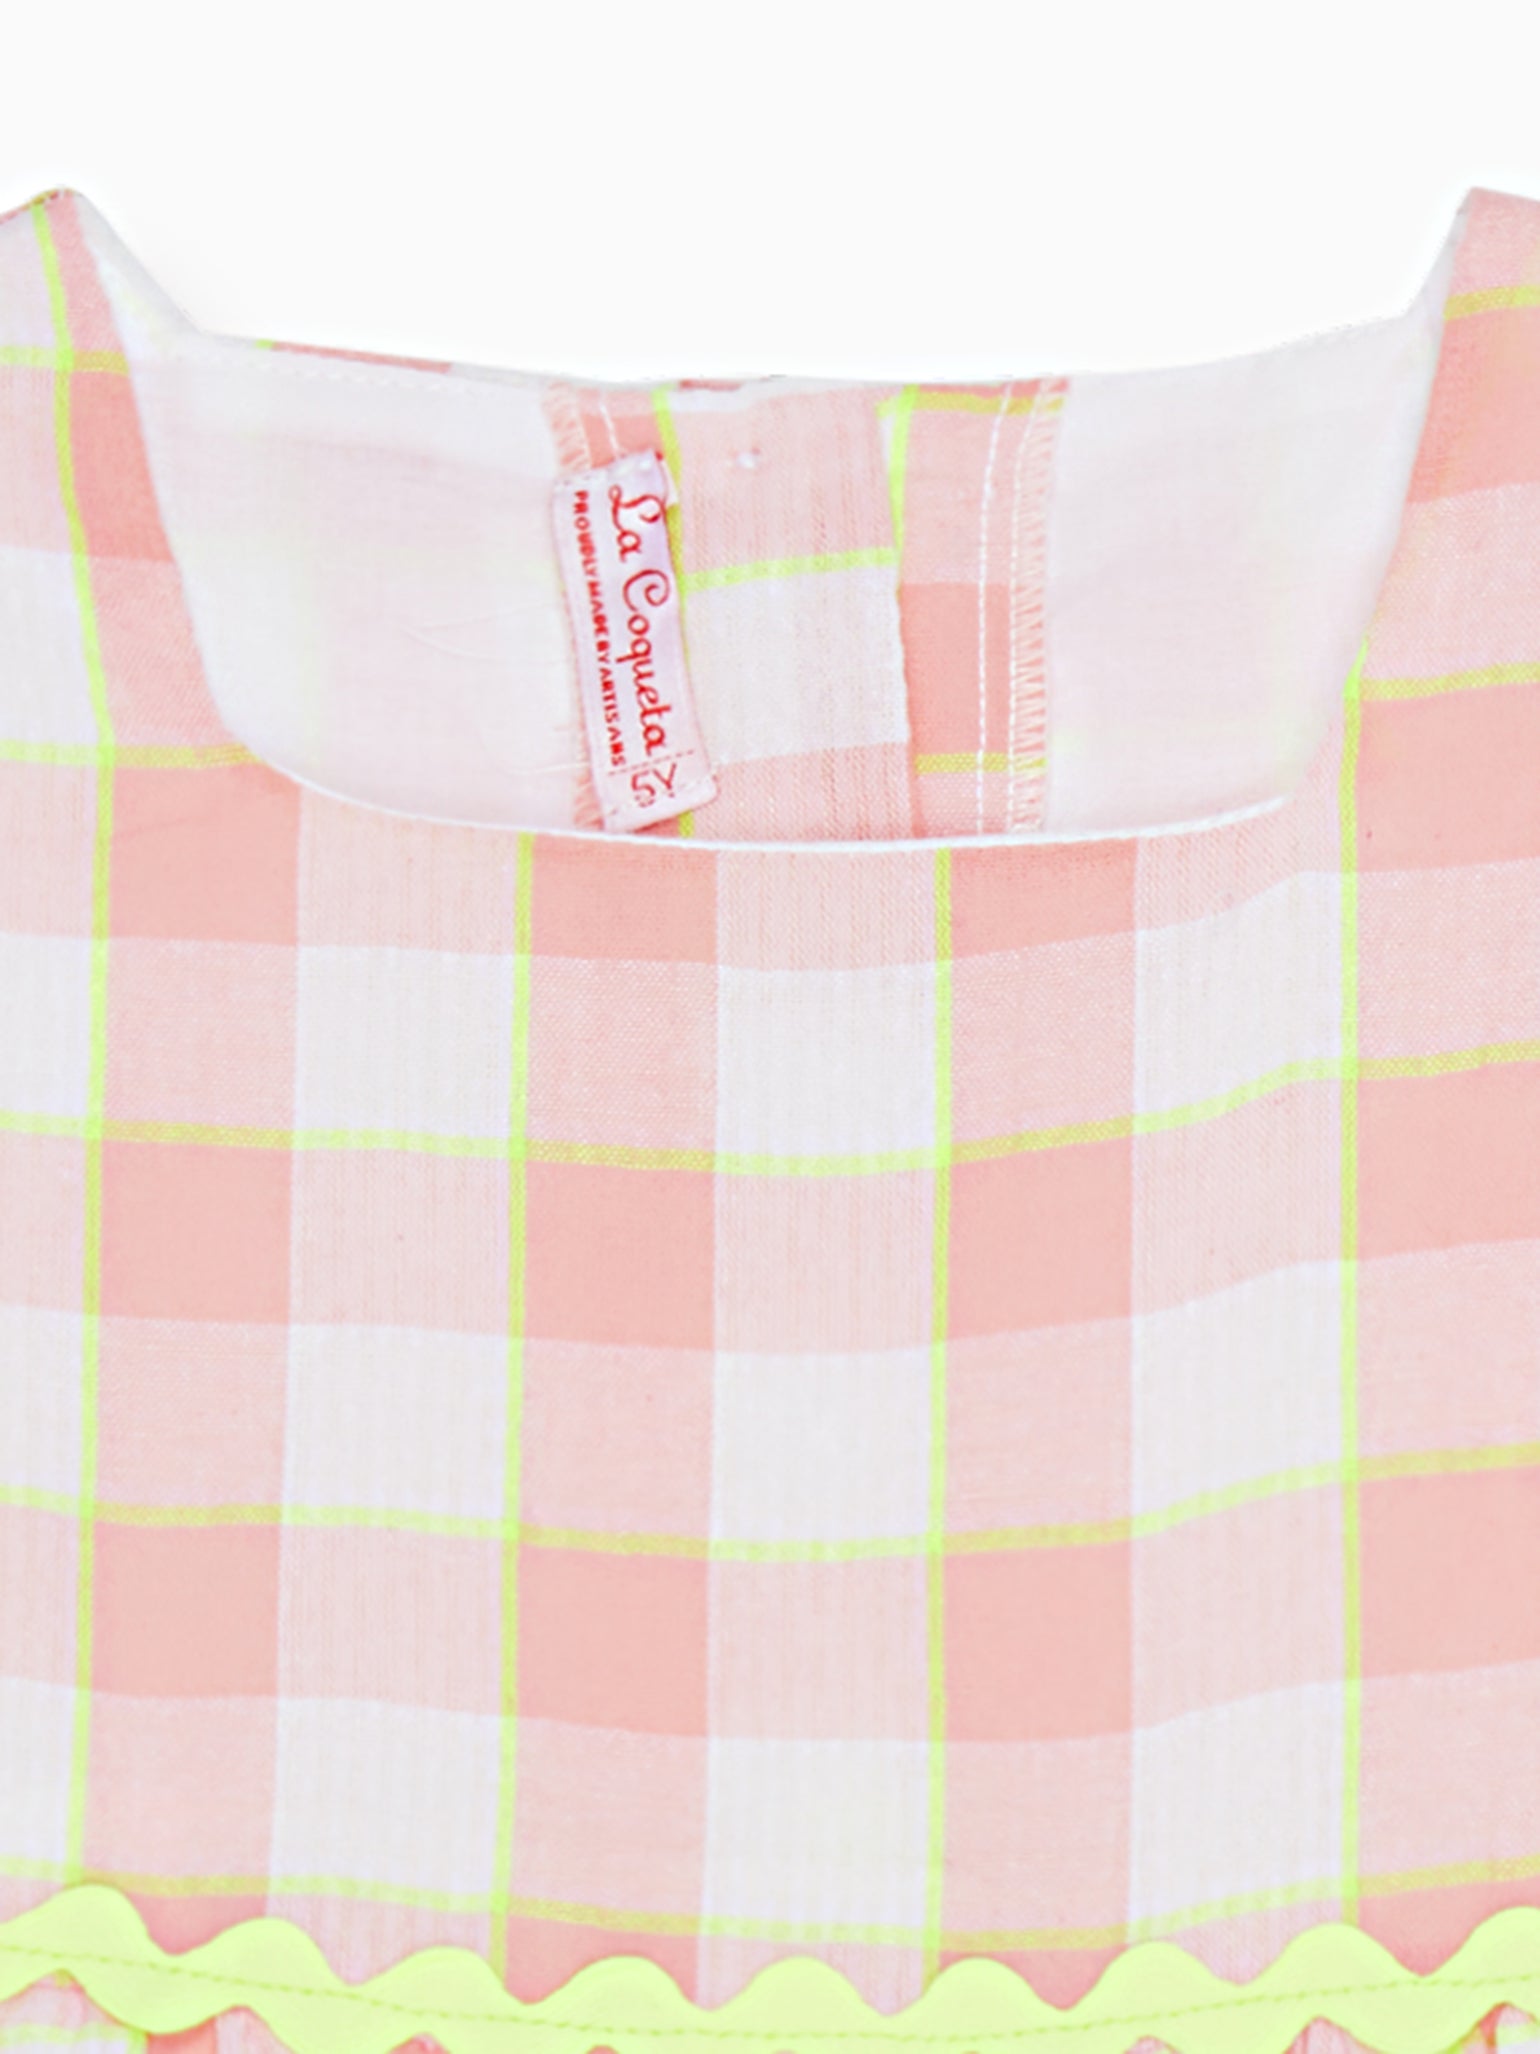 Pink Check Gabrielle Girl Fit And Flare Dress